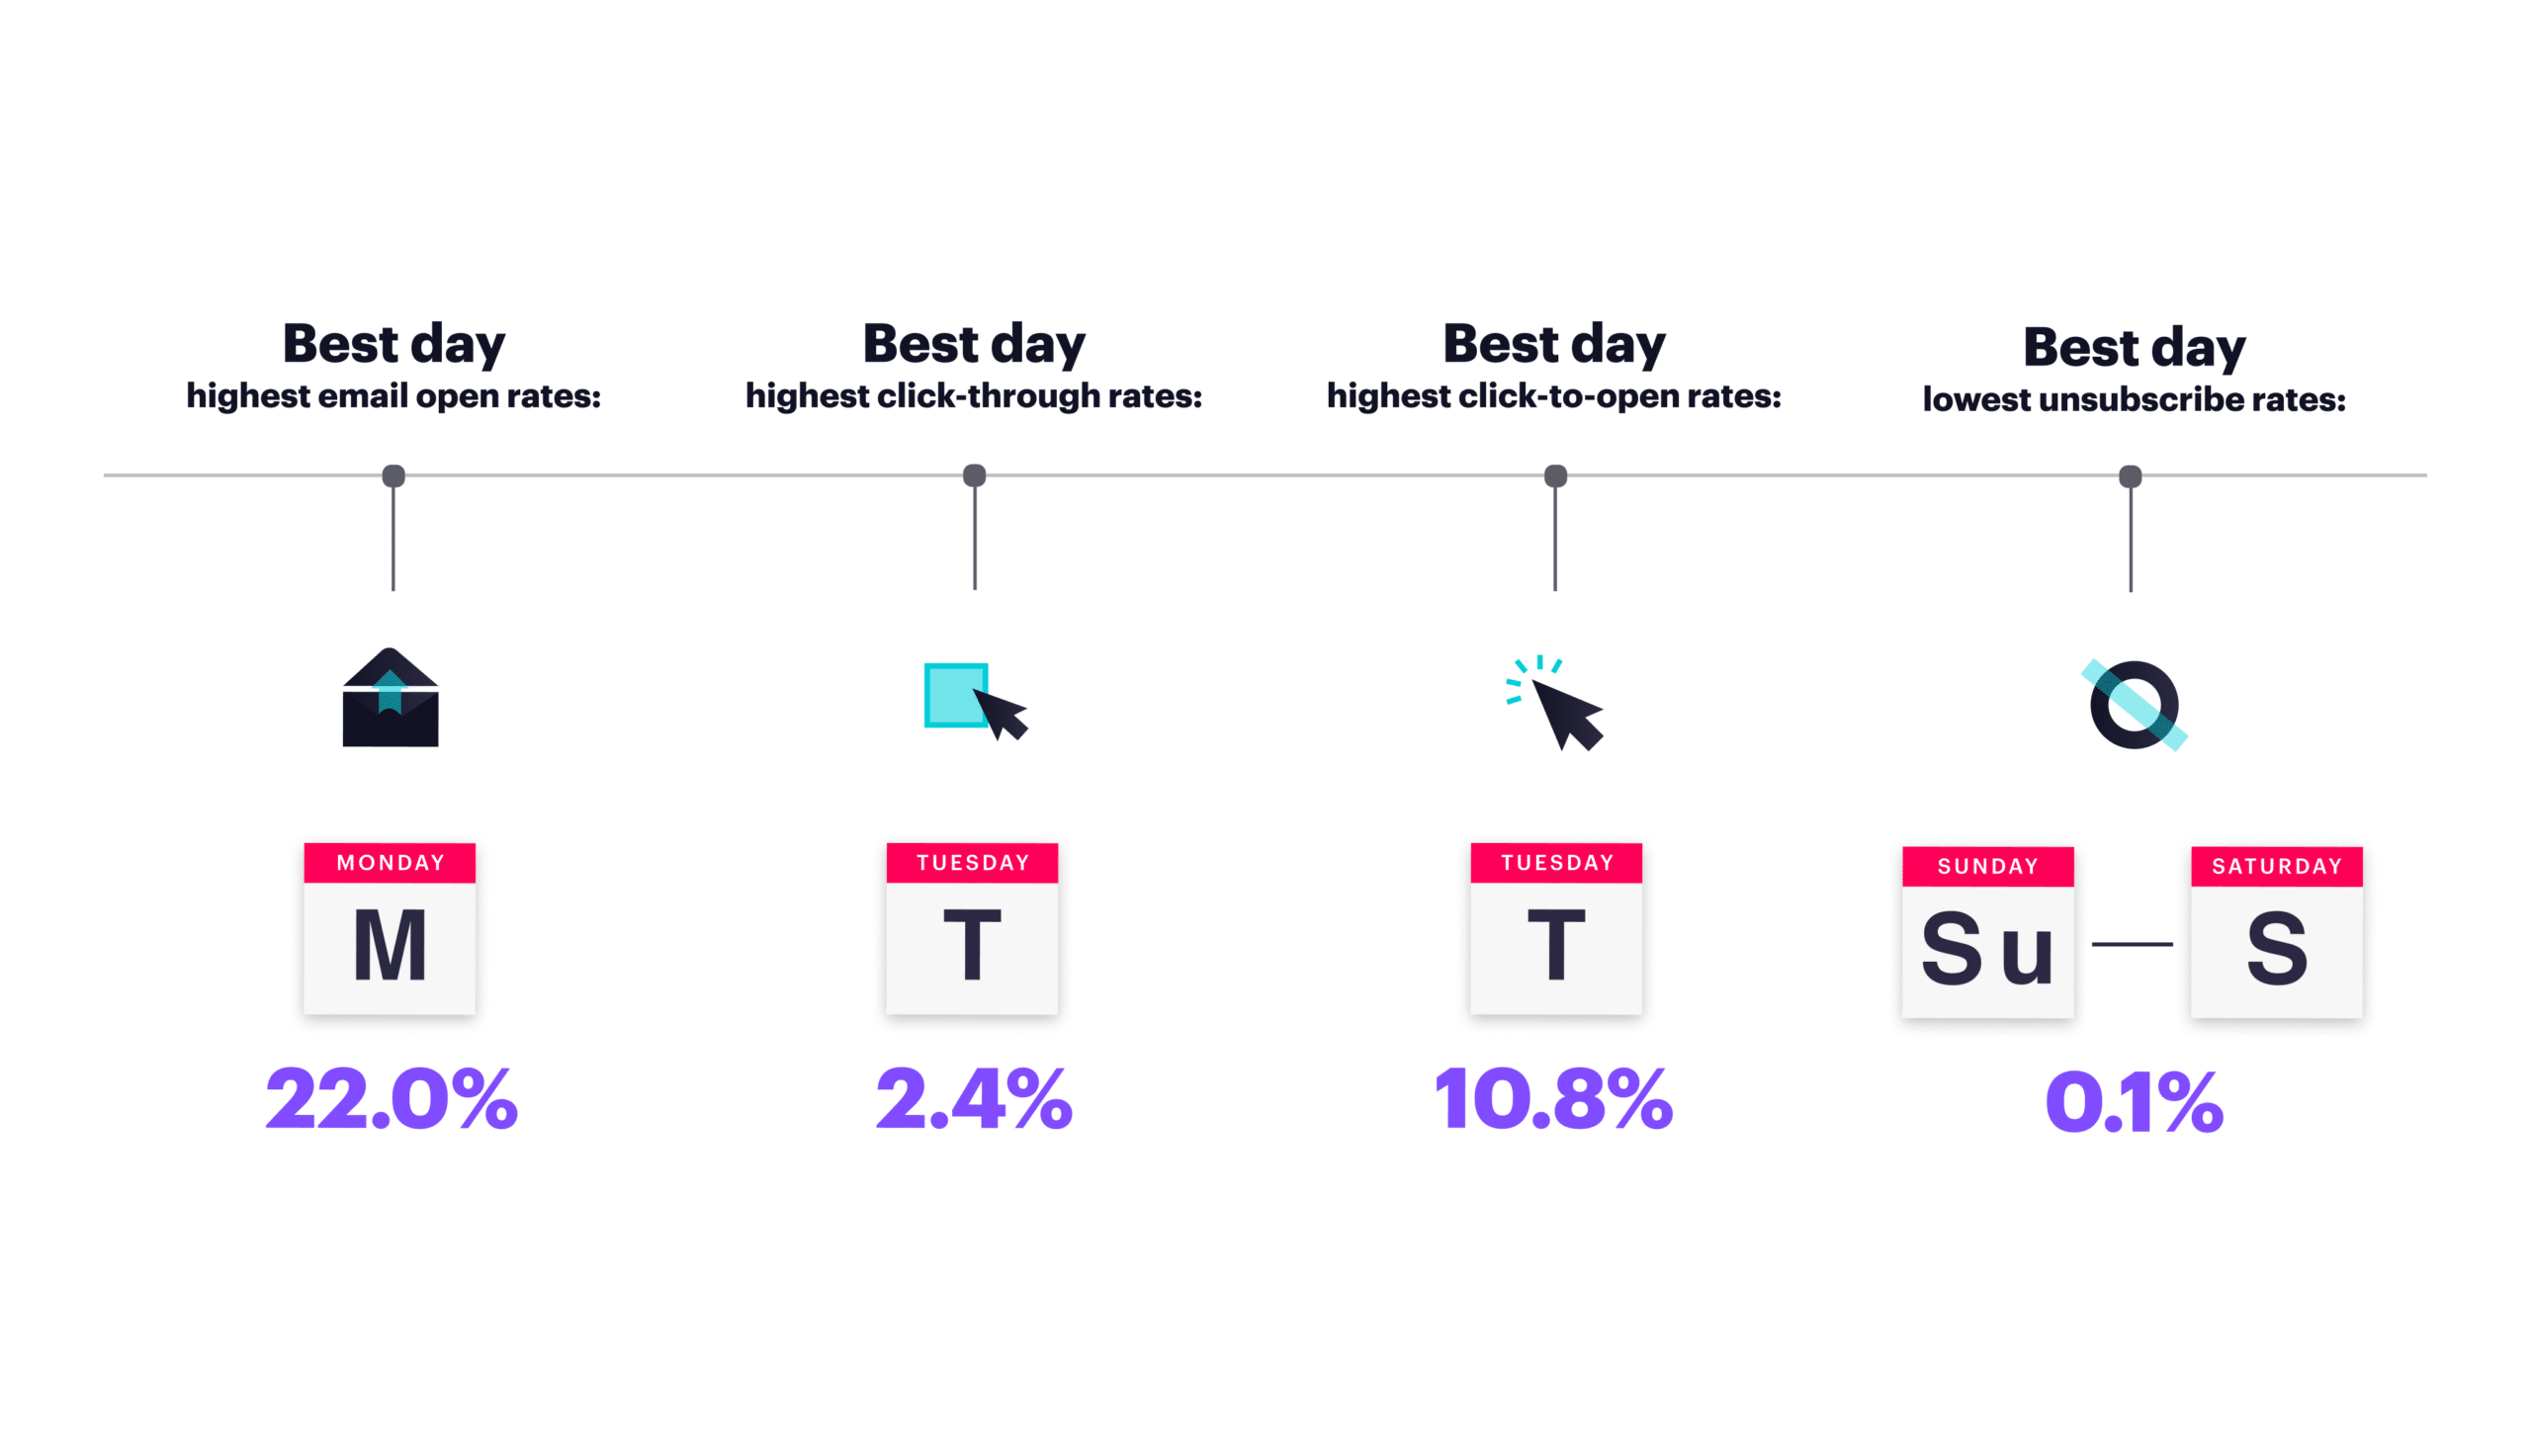 The best days to send email in 2022